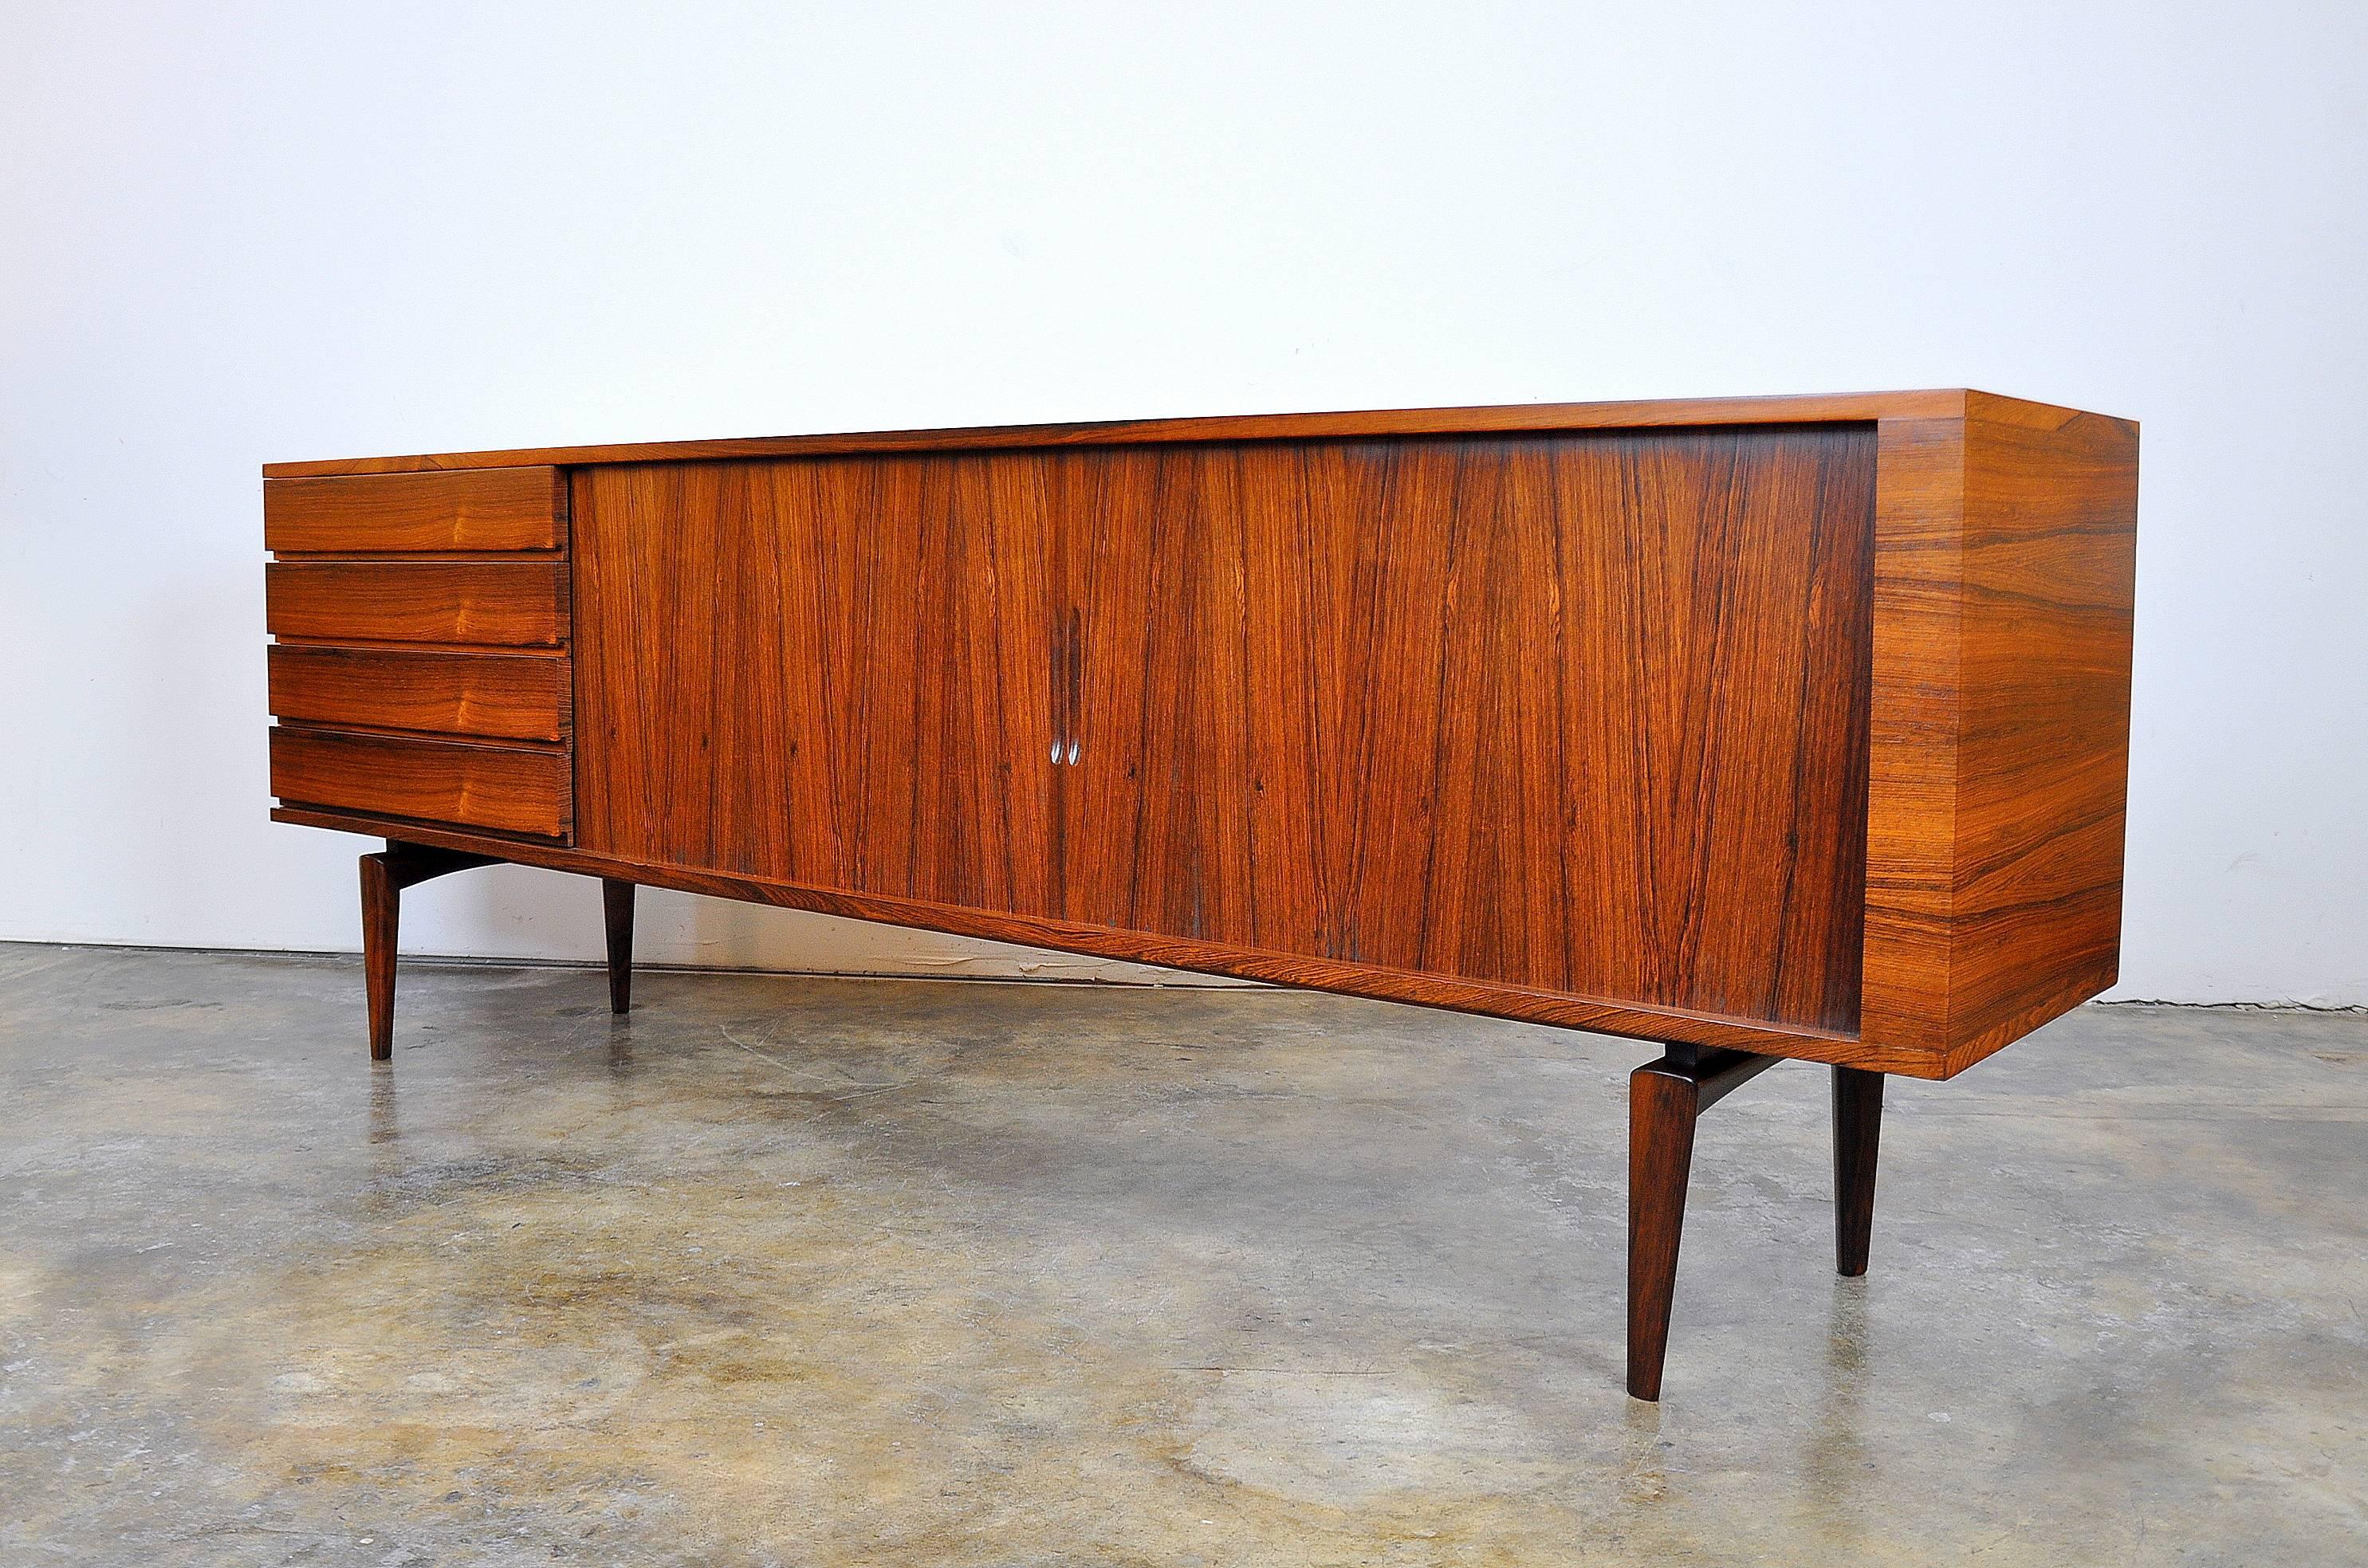 Outstanding Mid-Century Danish Modern sideboard designed by Scandinavian legend Henry Walter Klein for Bramin Mobler NA Jorgensens Mobelfabrik in the 1960s. This stunning buffet features a striking Silhouette very similar to the Presidential